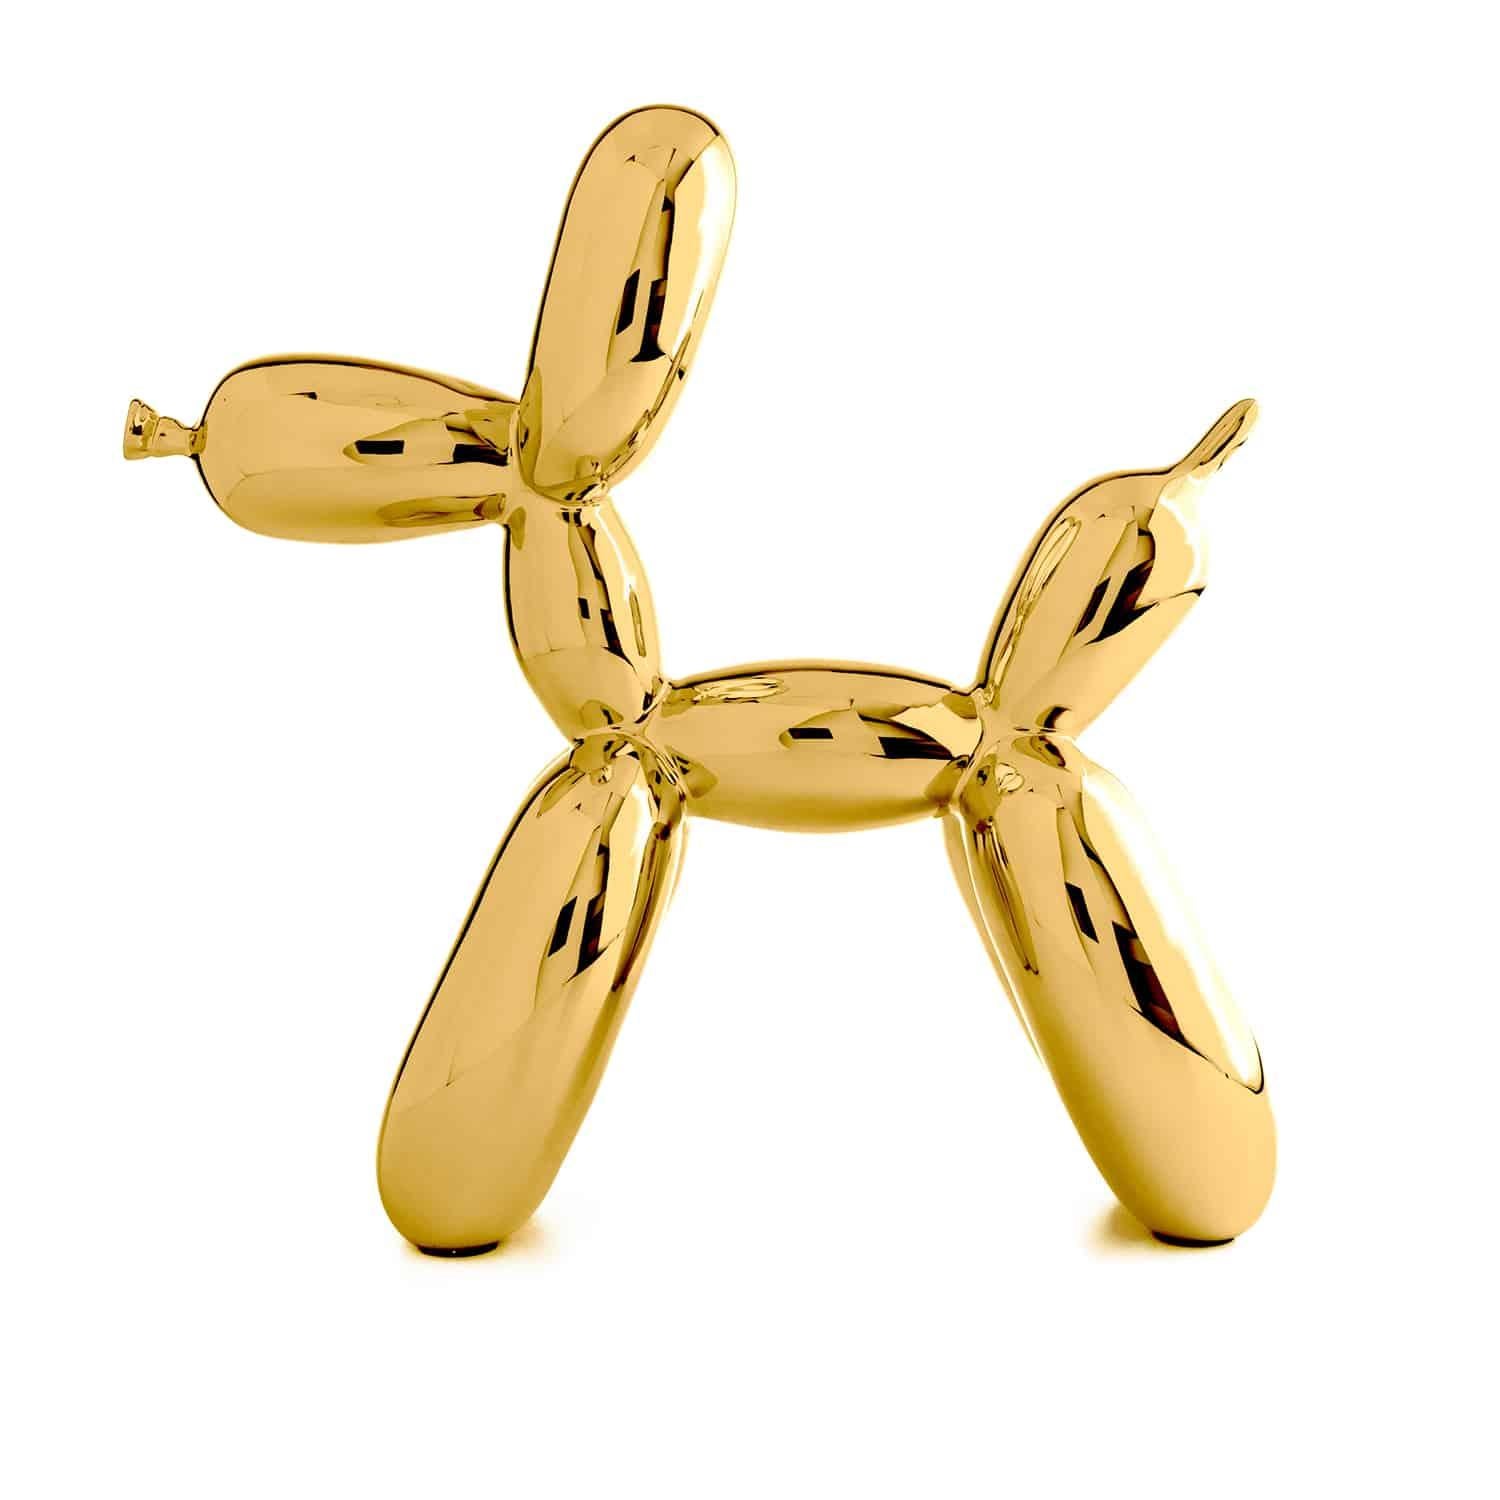 Balloon Dog ( After )  - Gold - Sculpture by After Jeff Koons